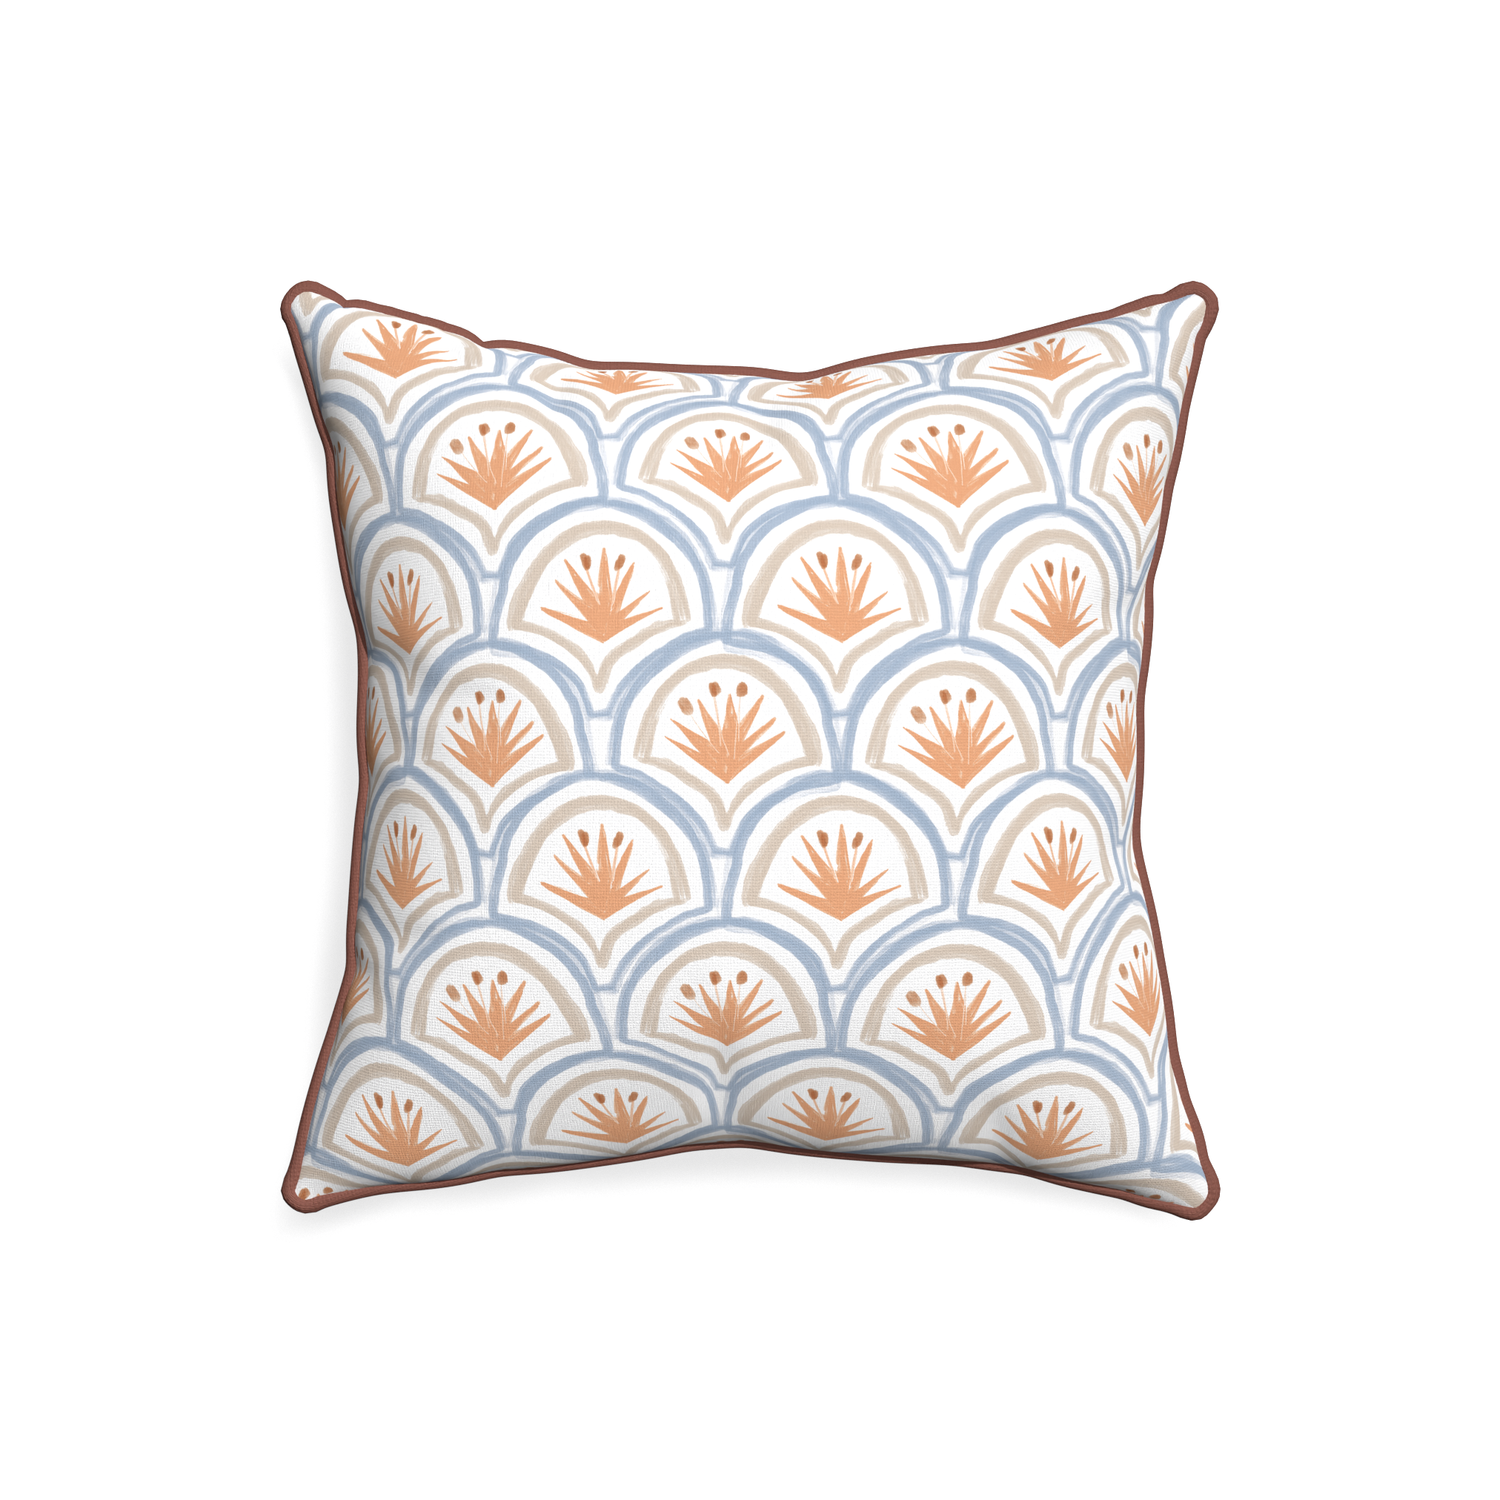 20-square thatcher apricot custom art deco palm patternpillow with w piping on white background